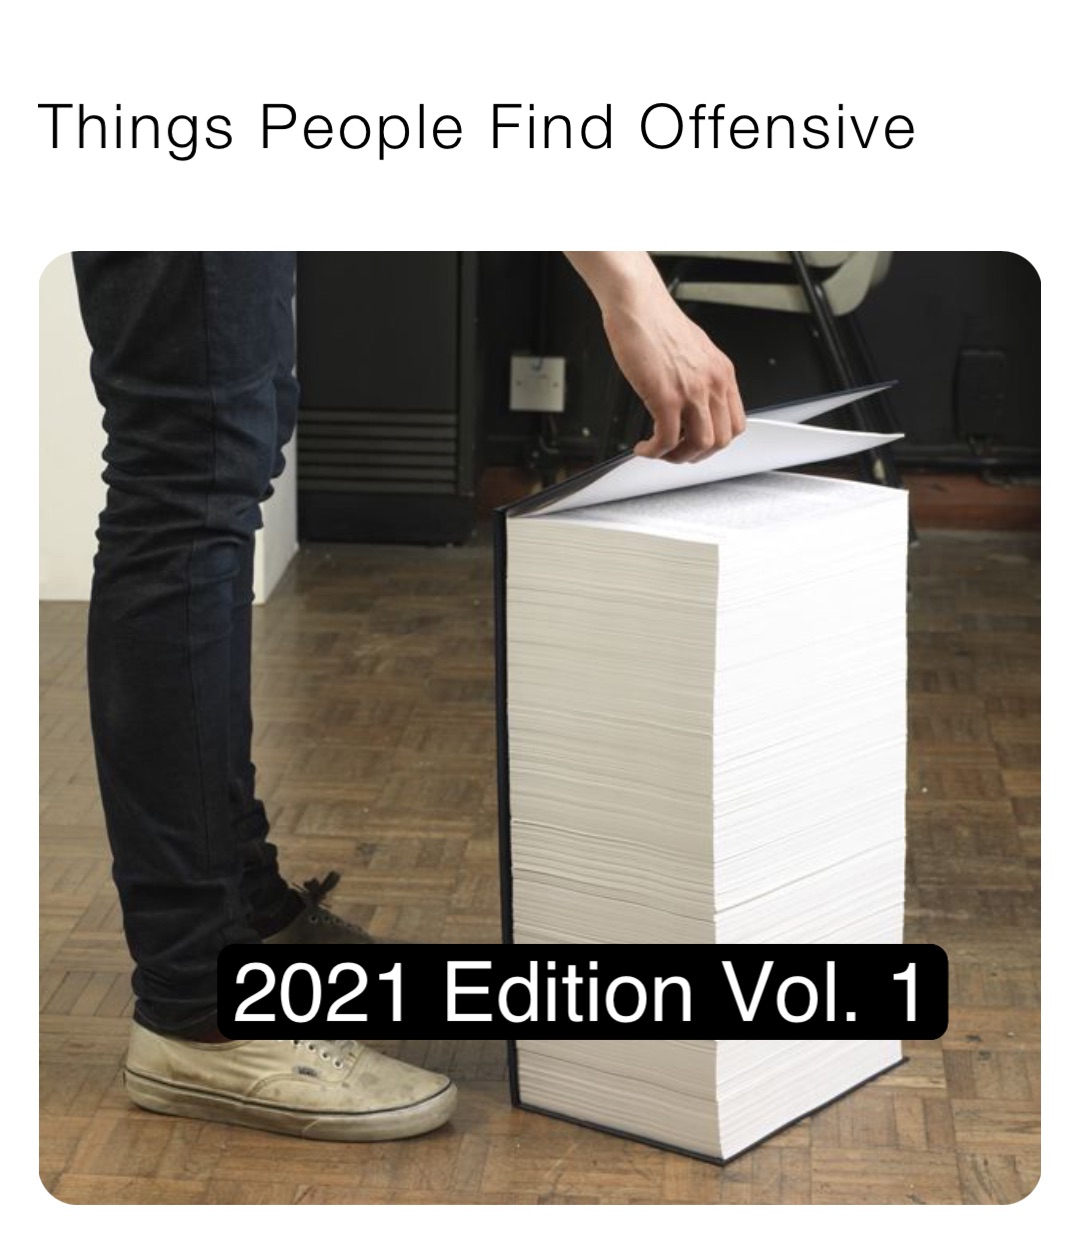 Things People Find Offensive 2021 Edition Vol. 1